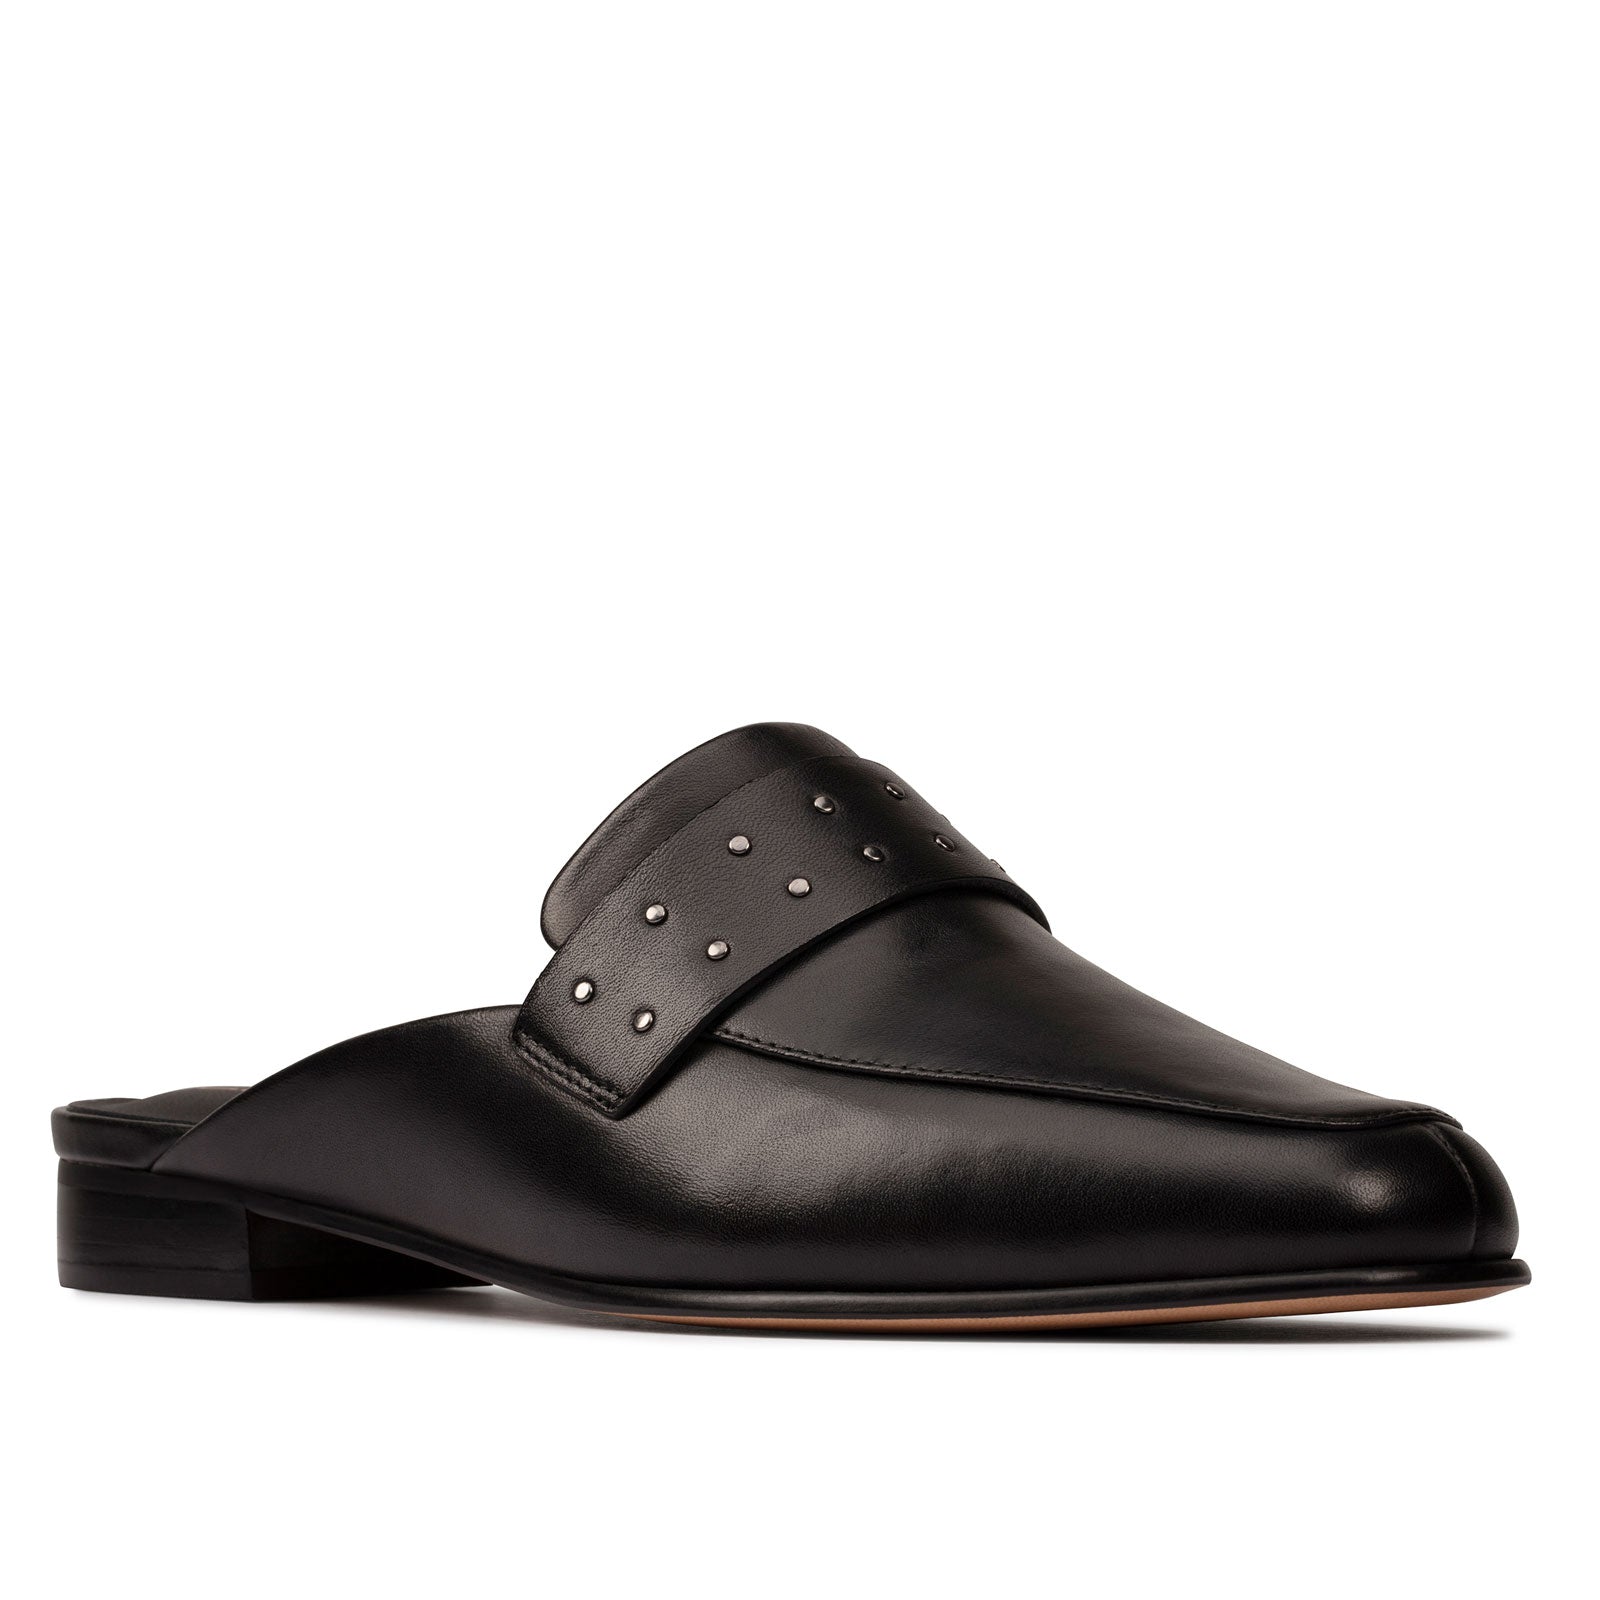 clarks black leather mules